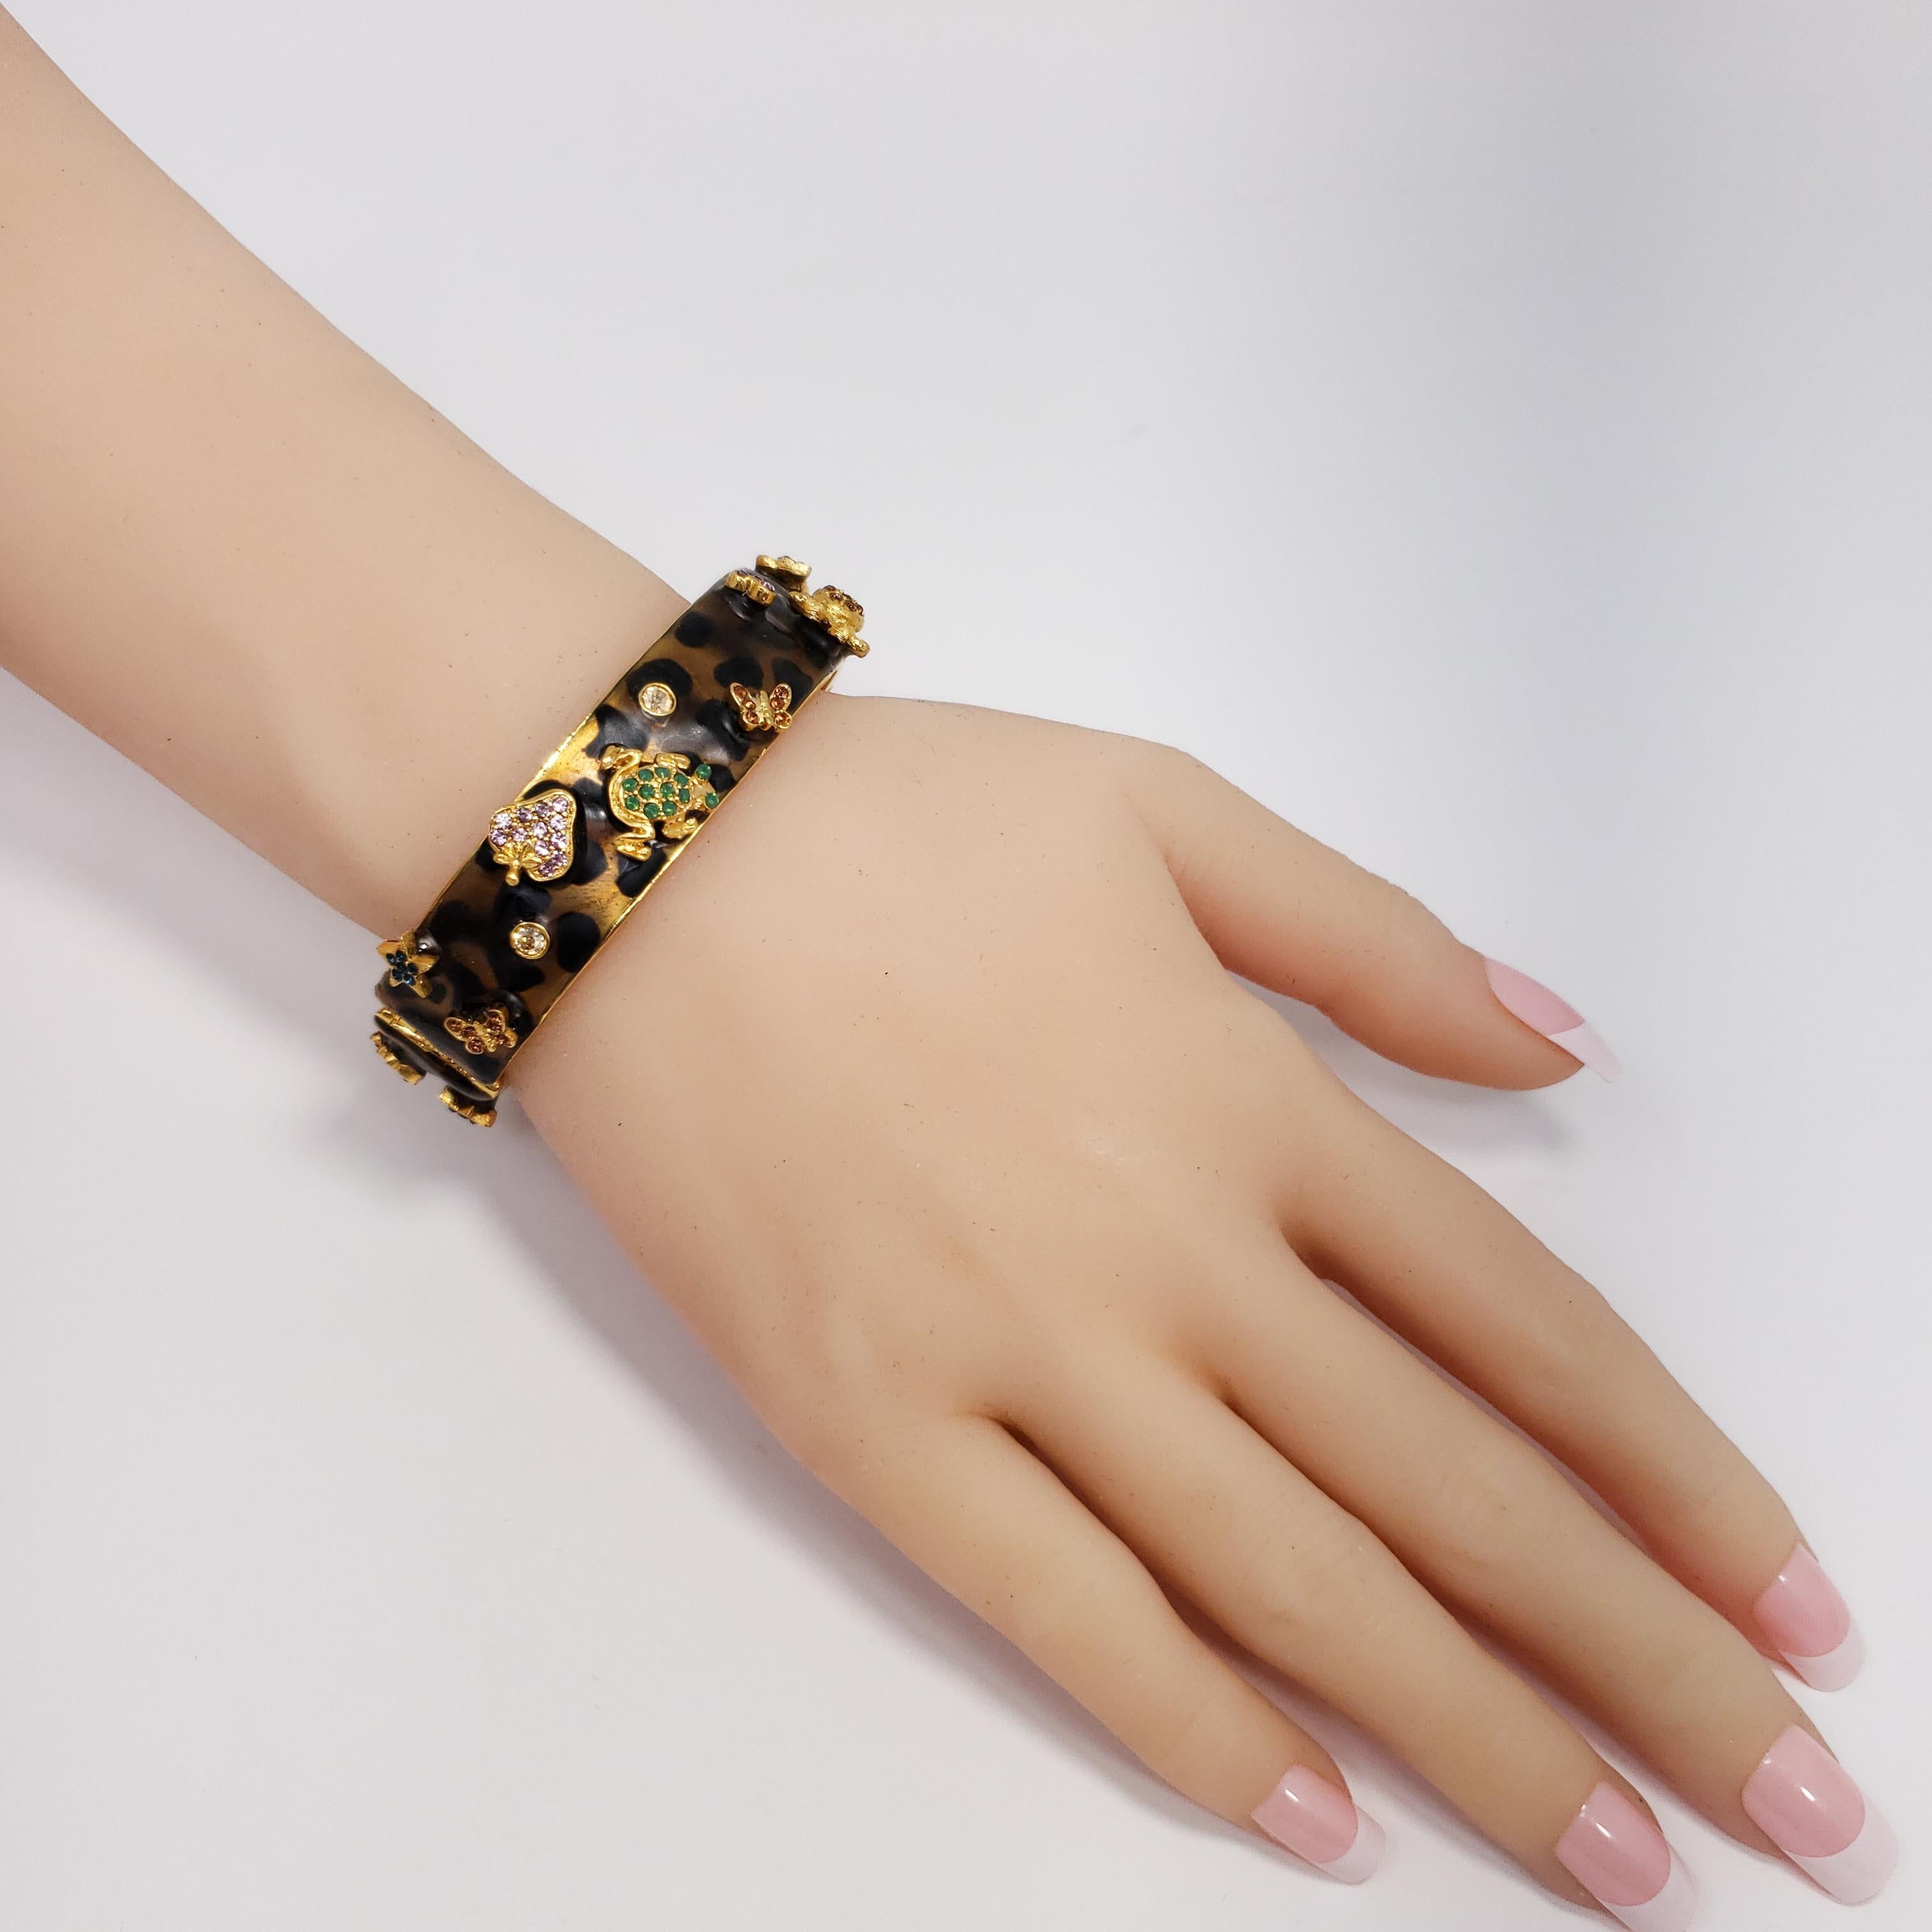 A bracelet by Kenneth Jay Lane in an exotic leopard pattern. Features raised gold-plated motifs accented with colorful crystals.

Height: 1.6 cm / 0.6 in
Diameter at widest part: 5.56 cm / 2.19 in
Inner circumference: 16.5 cm / 6.5 in 

Hallmarks: